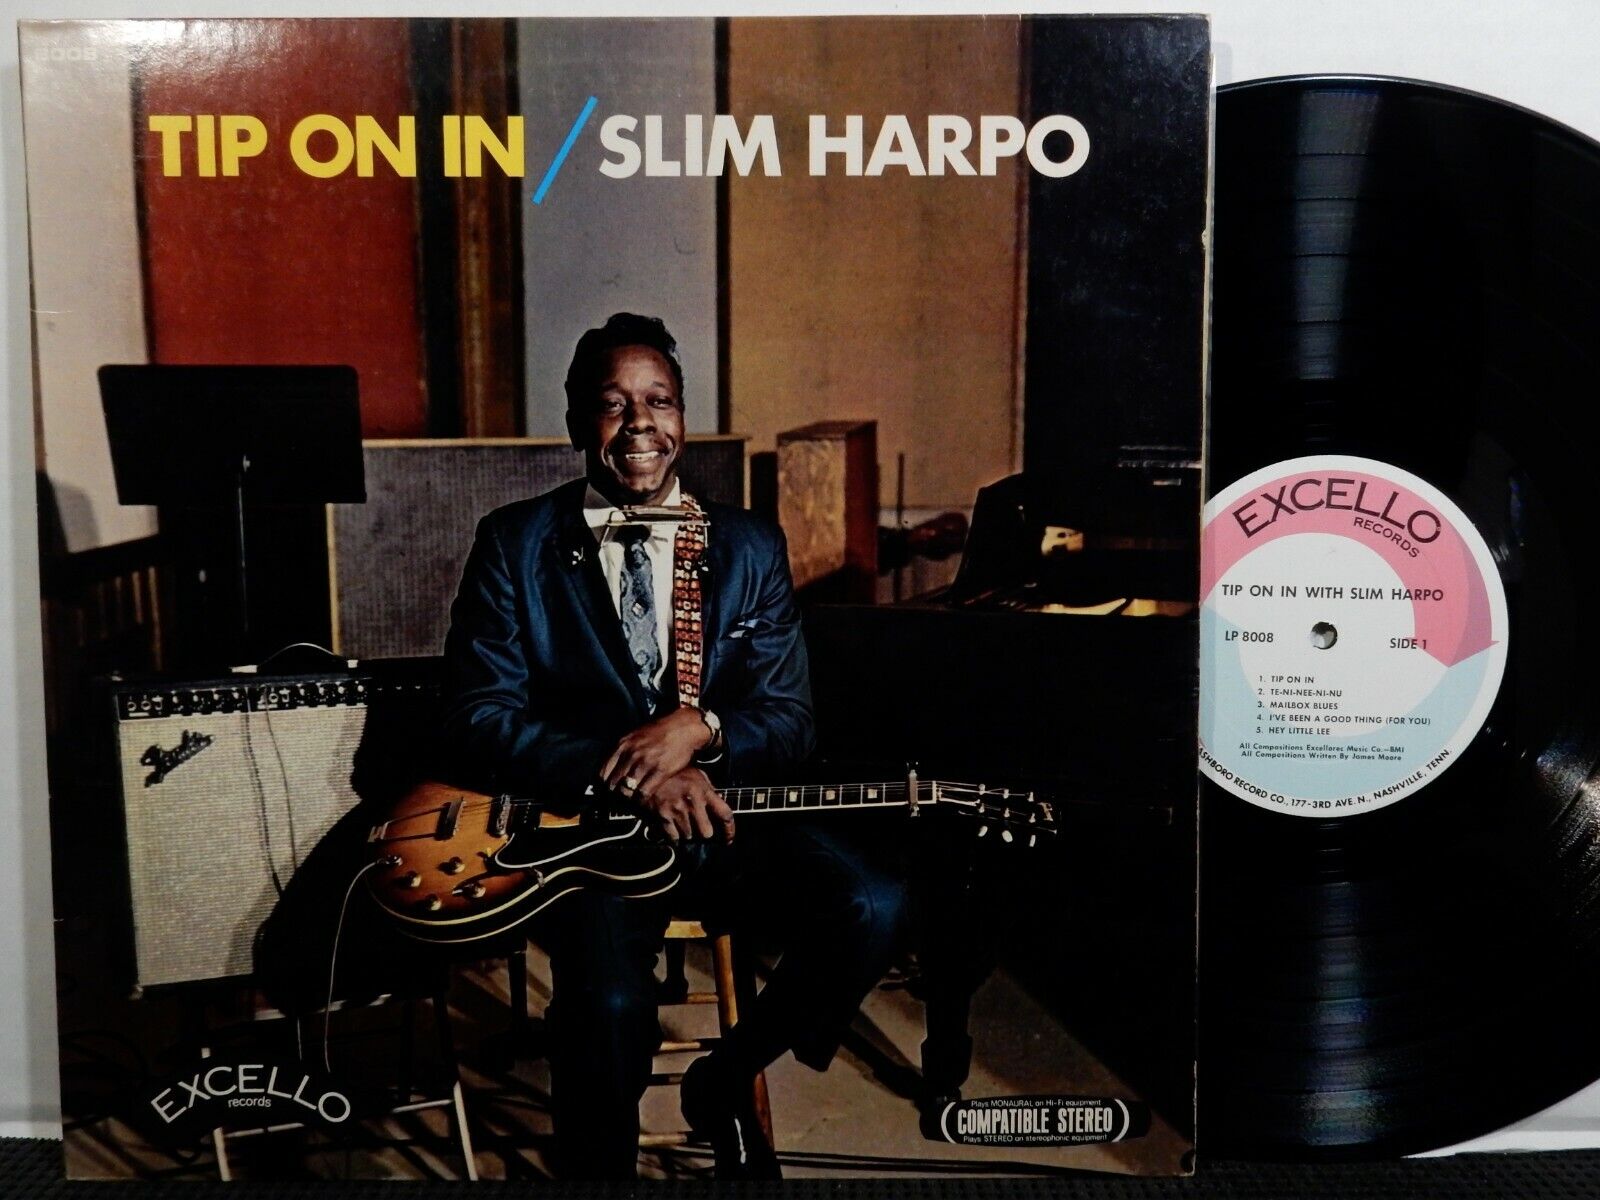 SLIM HARPO Tip On In LP EXCELLO 8008 STEREO 1968 Blues